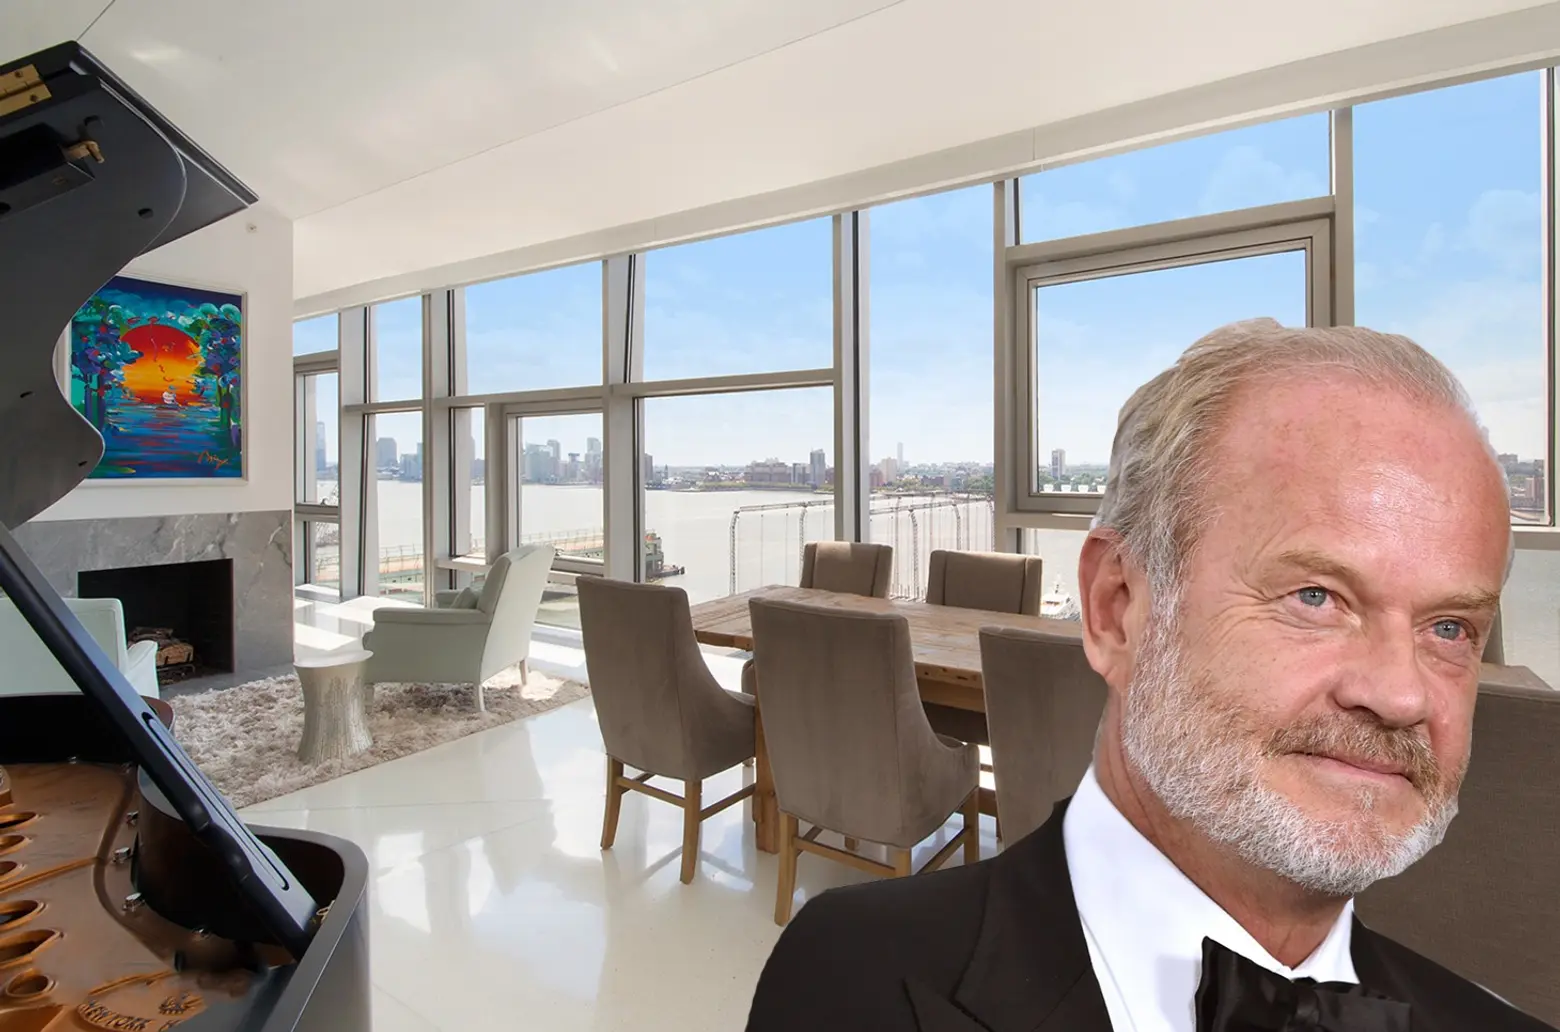 Kelsey Grammer’s Chelsea condo in contract for nearly $8M